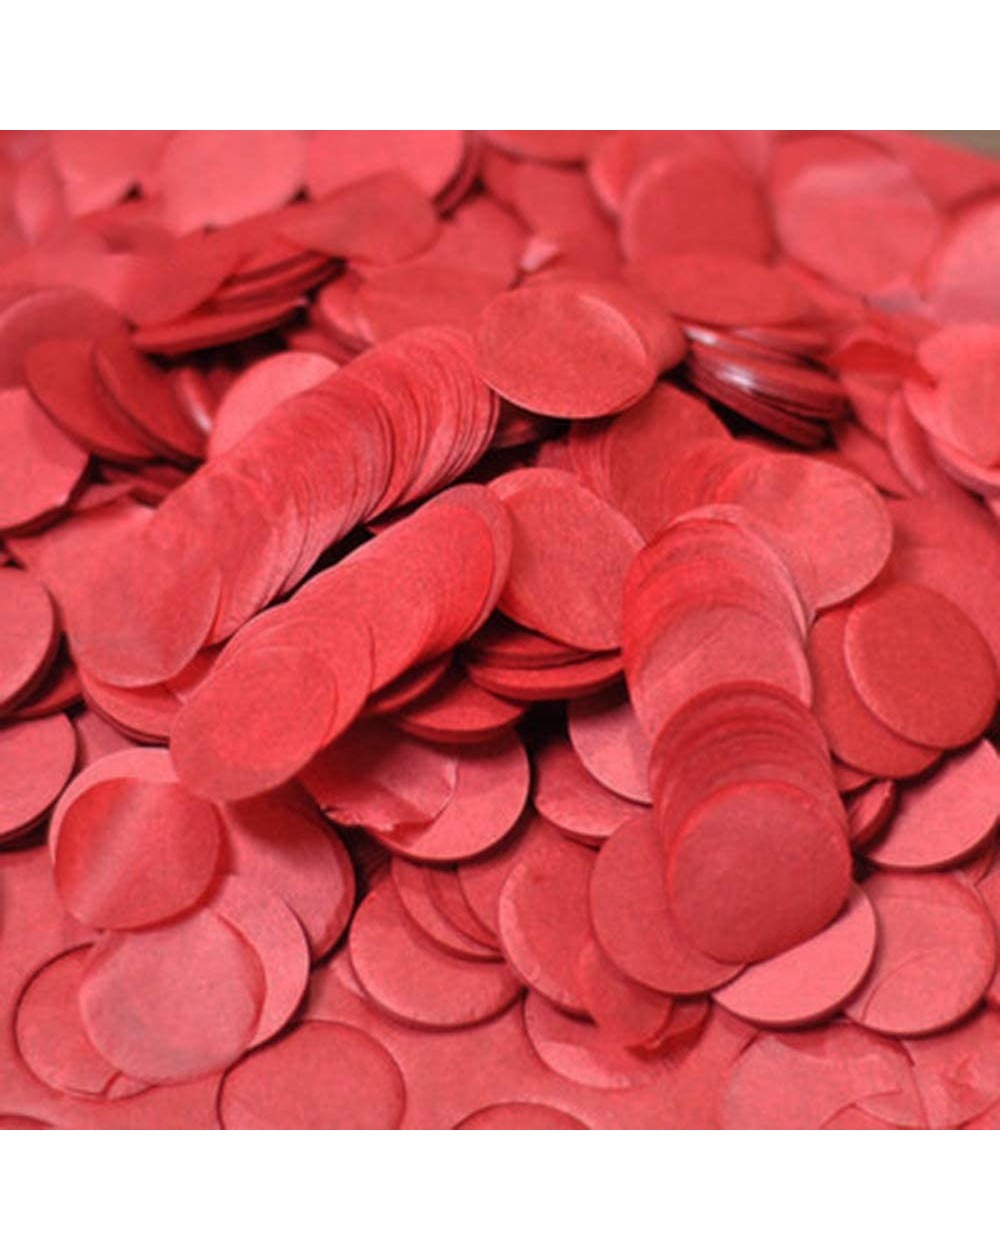 Confetti Red Tissue Confetti 1inch Circle Confetti 5000pcs for Filled Balloon or Table Party Decoration - Red - C318UUX2GYG $...